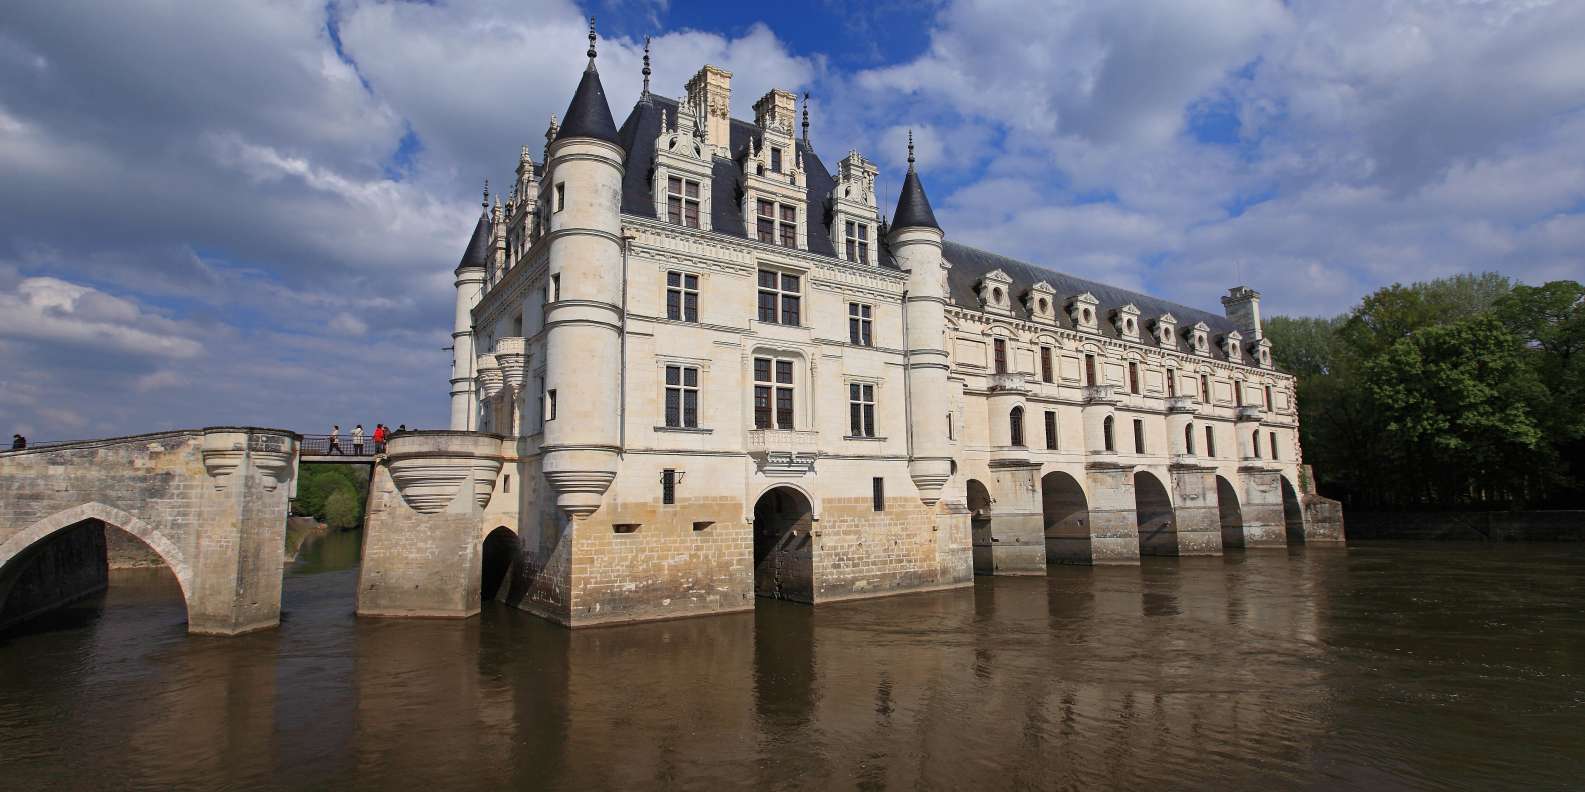 Catherine de Medici and the chateau of Chenonceau - Loire Valley